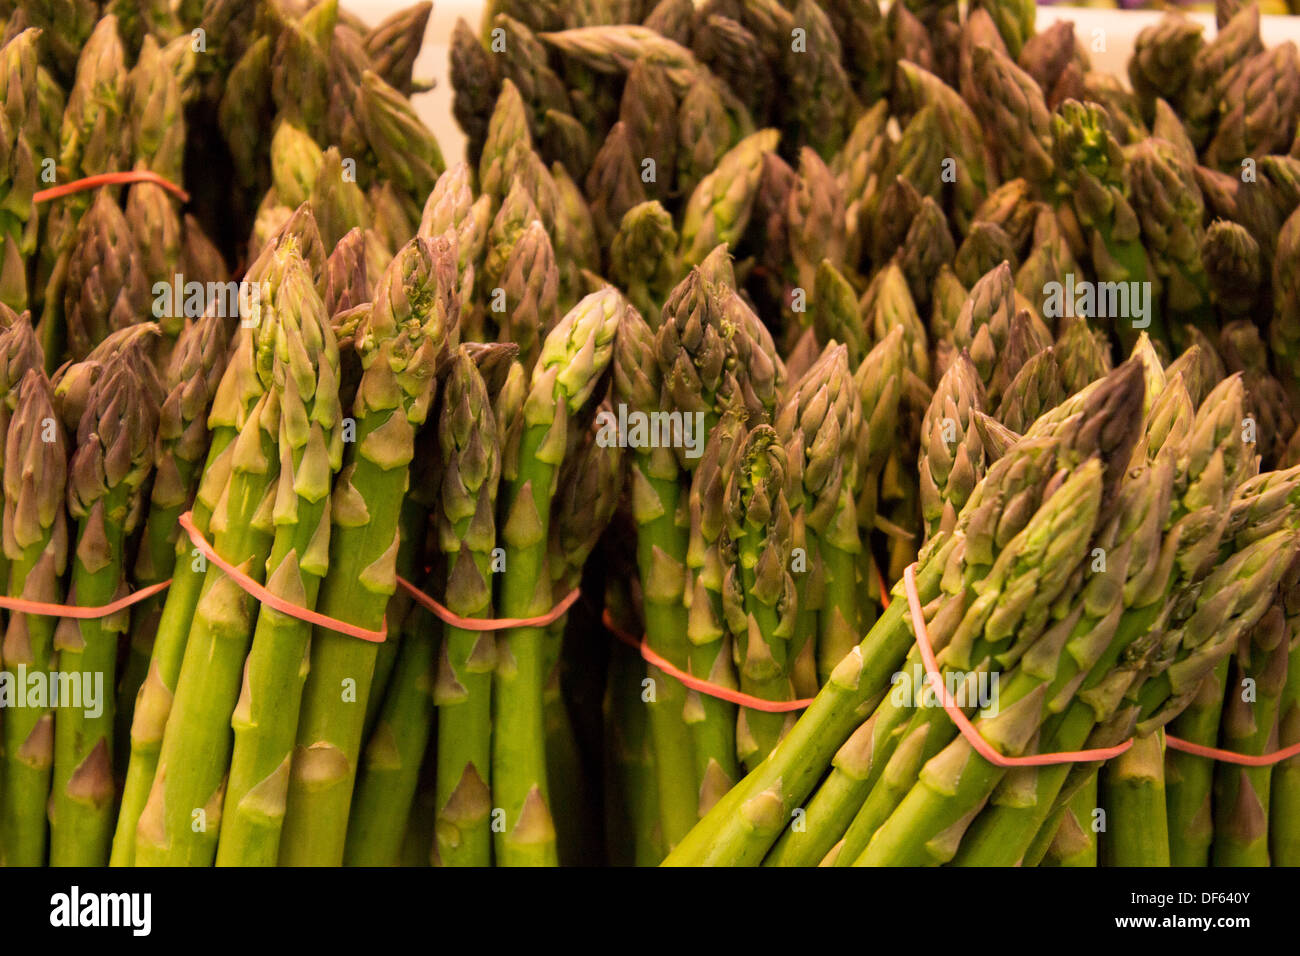 Lots of asparagus in bundles wrapped in elastic bands Stock Photo